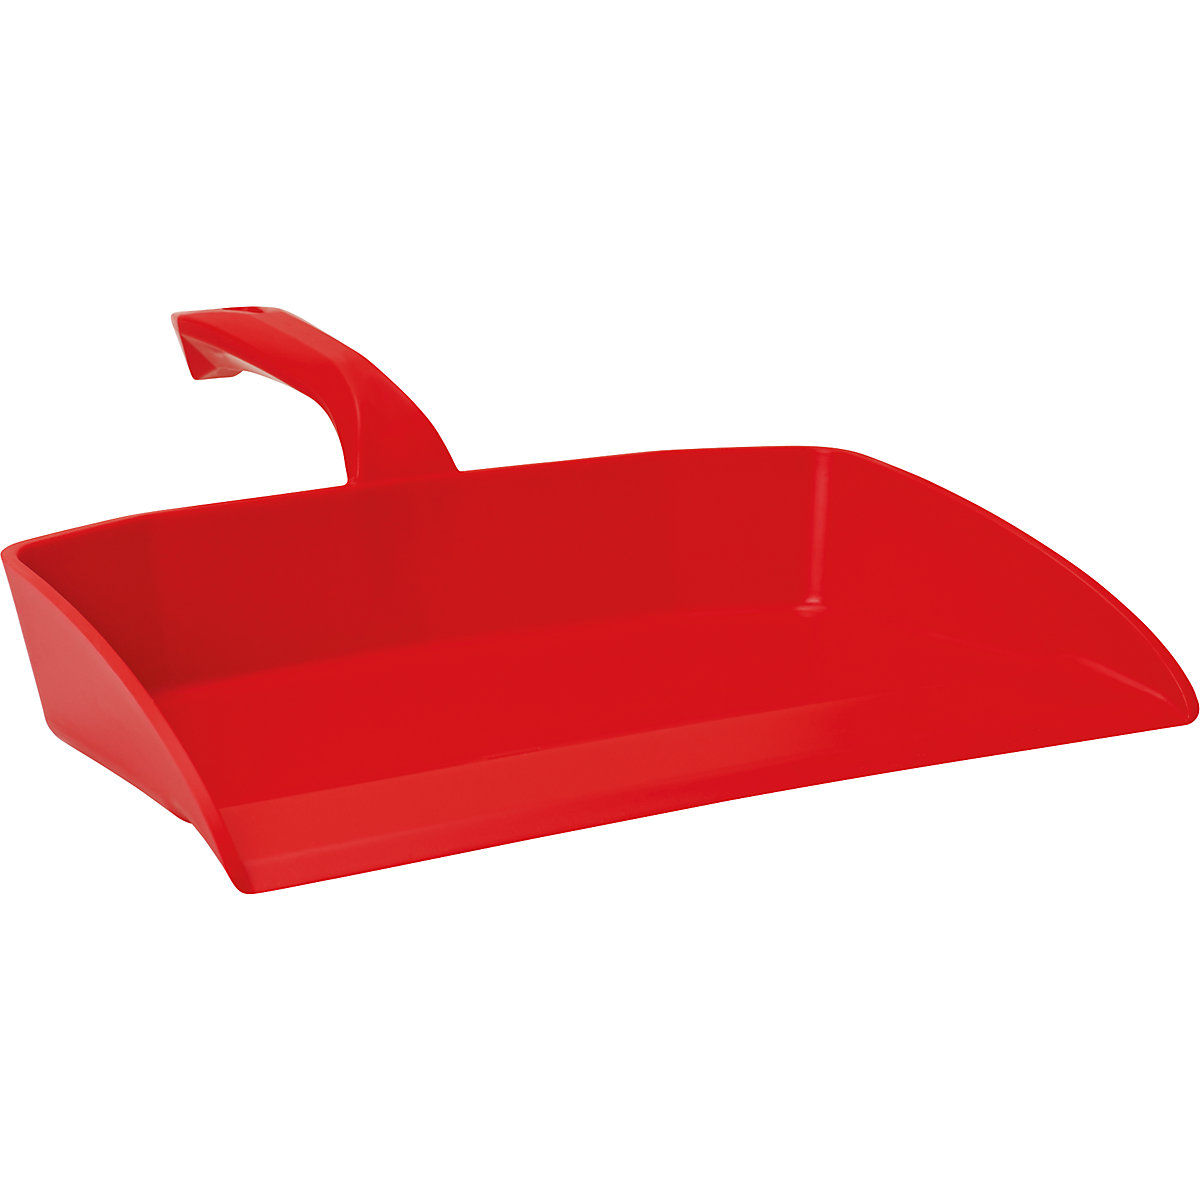 Dustpan – Vikan, overall length 330 mm, pack of 10, red